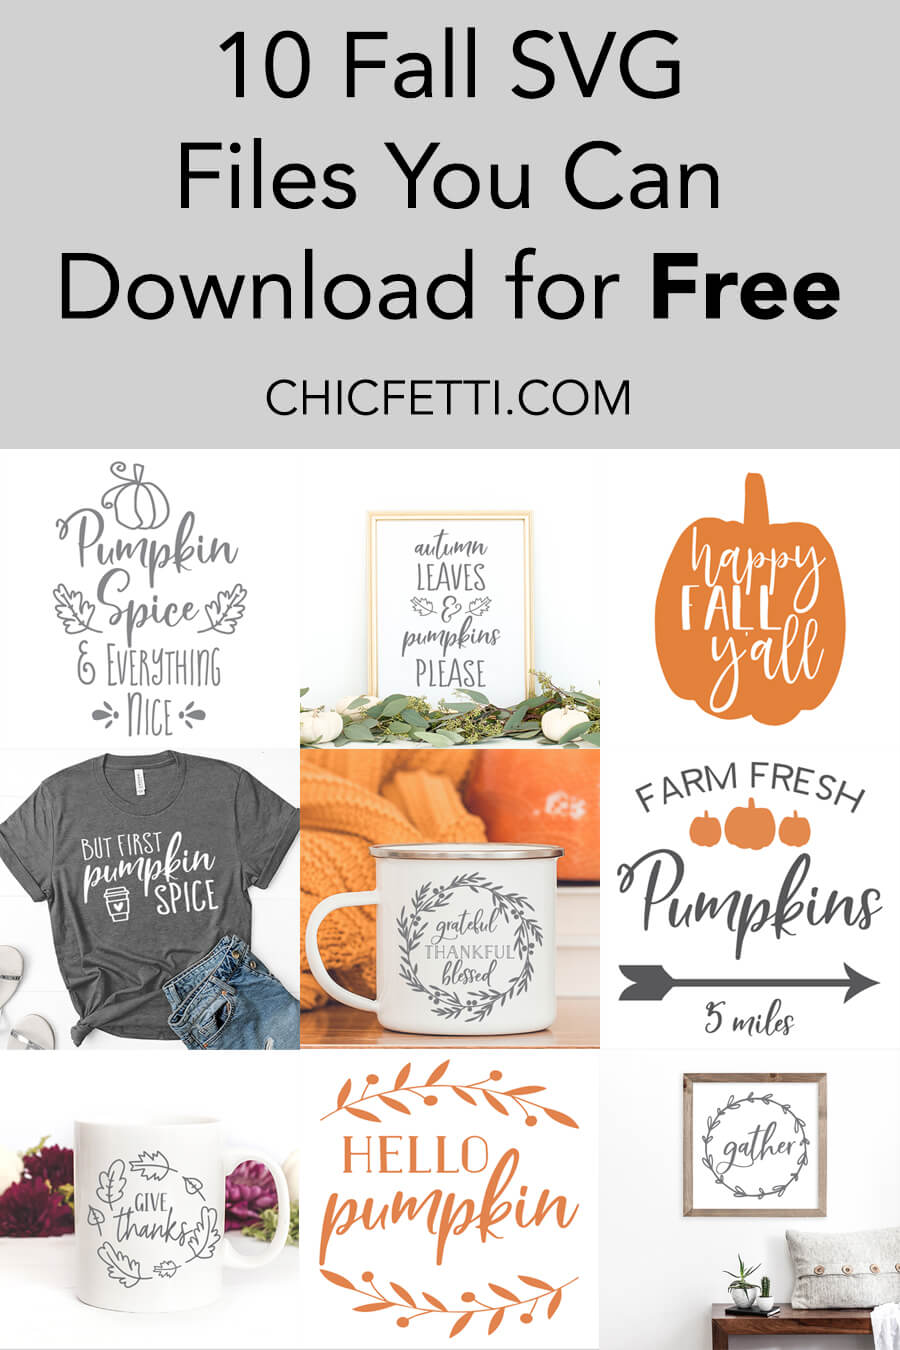 Download 10 Fall SVG Files You Can Download for Free - Chicfetti